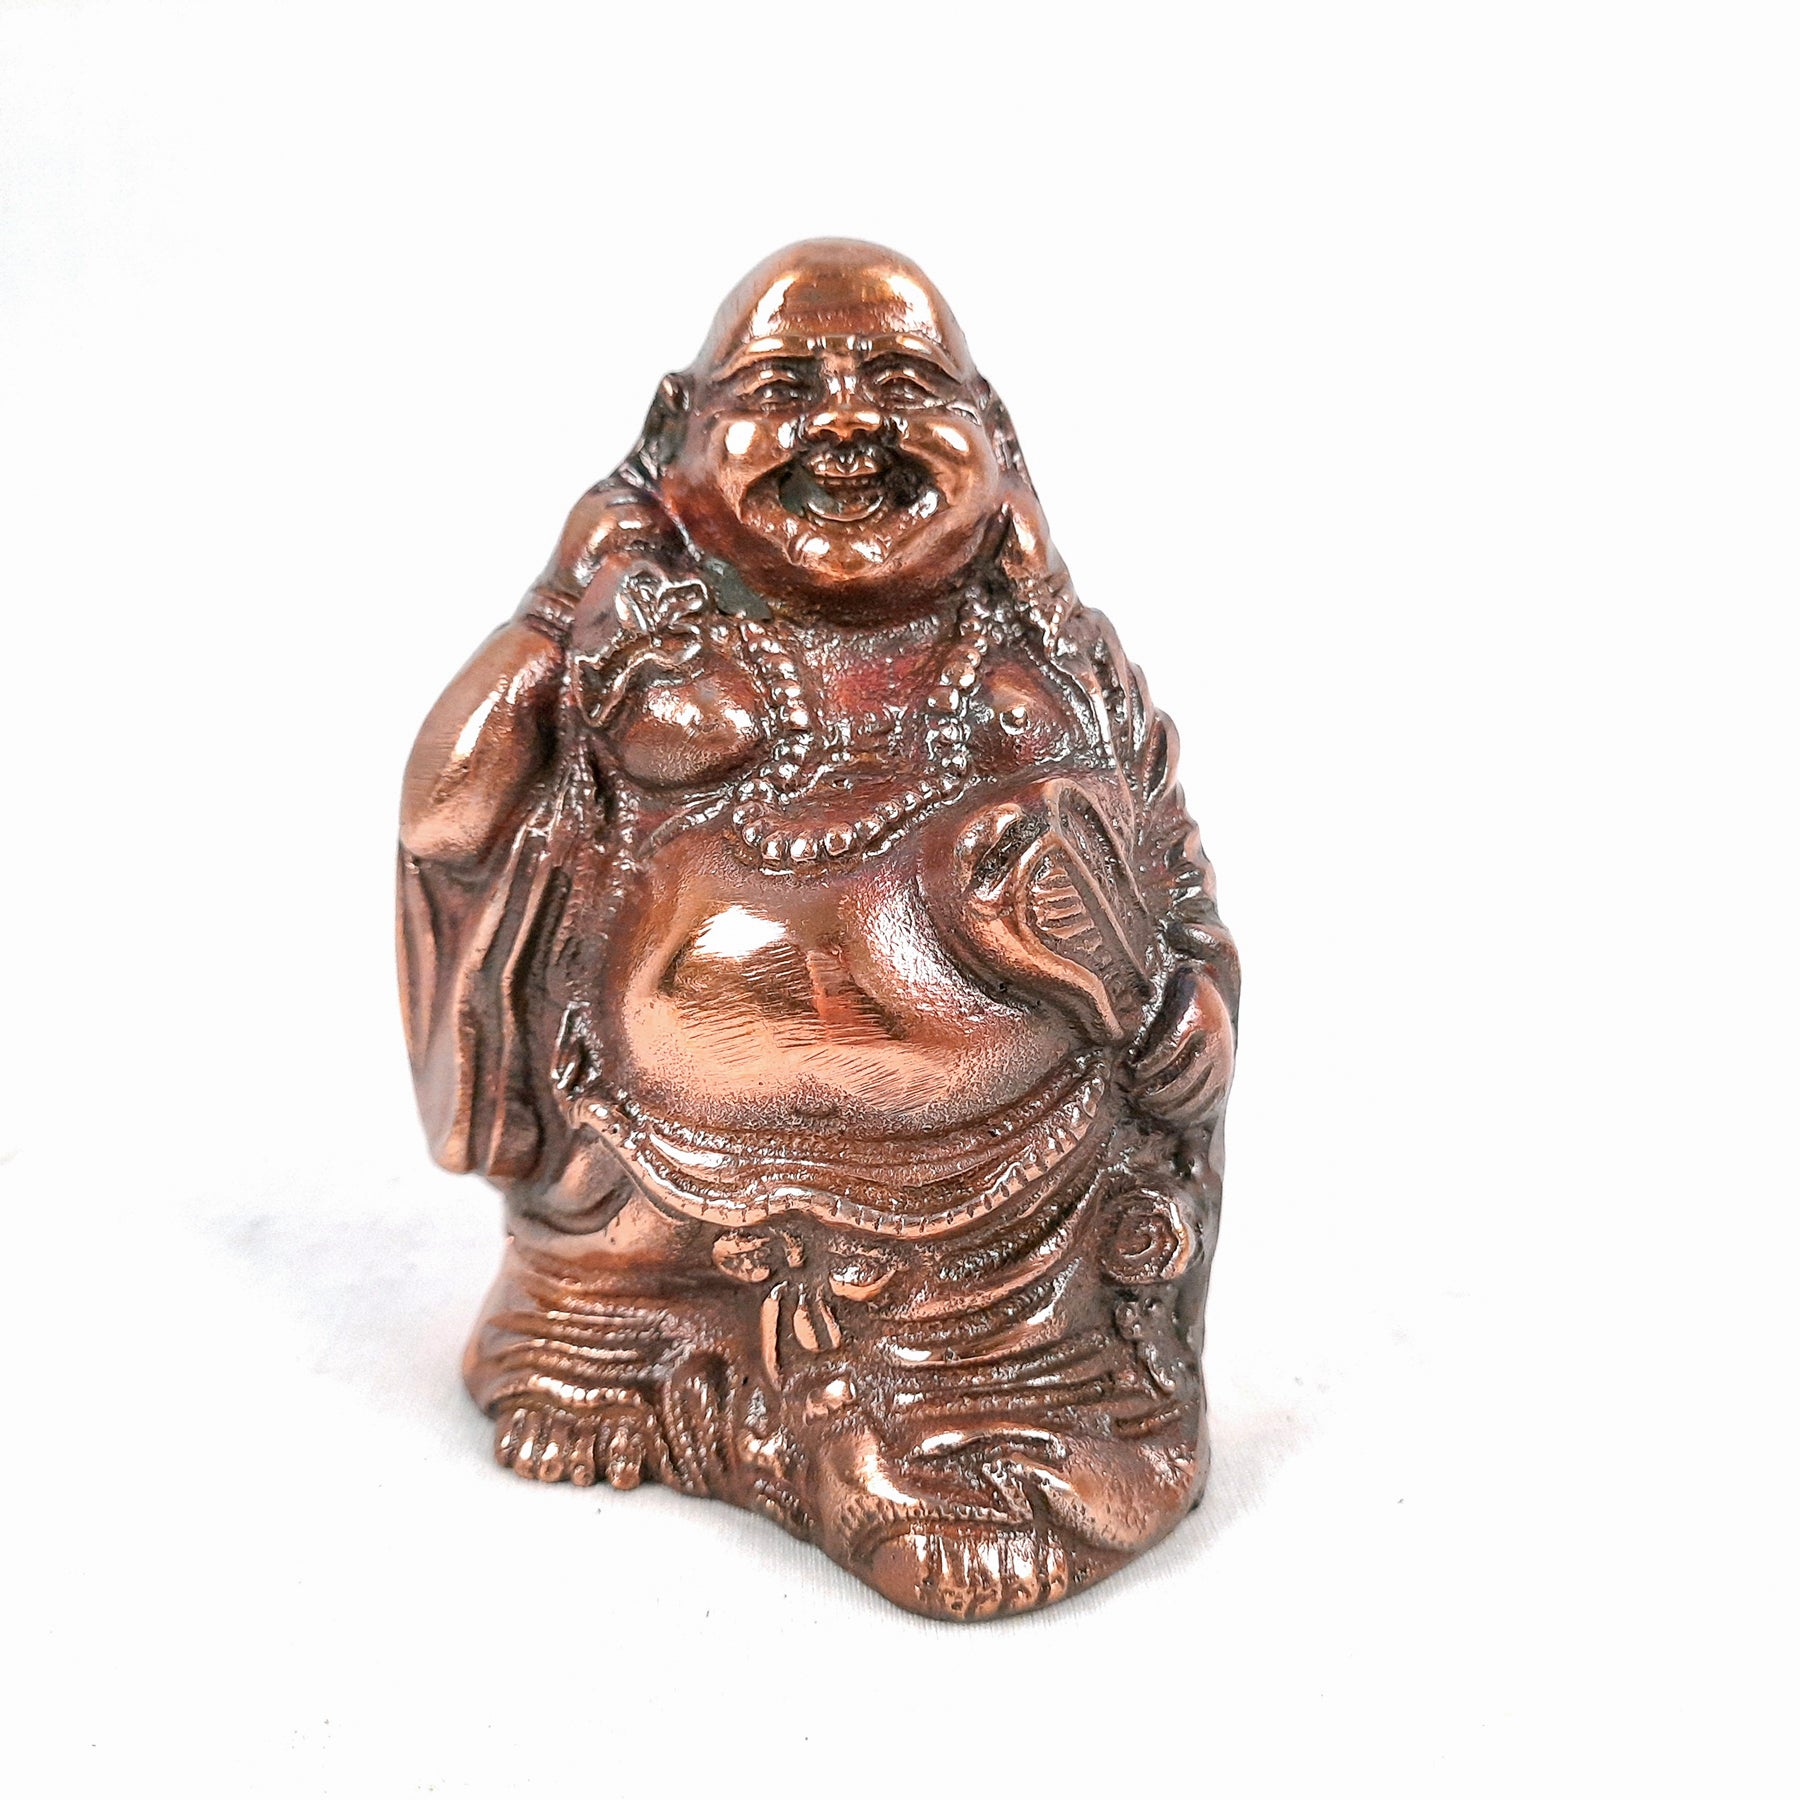 Buy Set of 6 Little Smiling Golden Laughing Buddhas